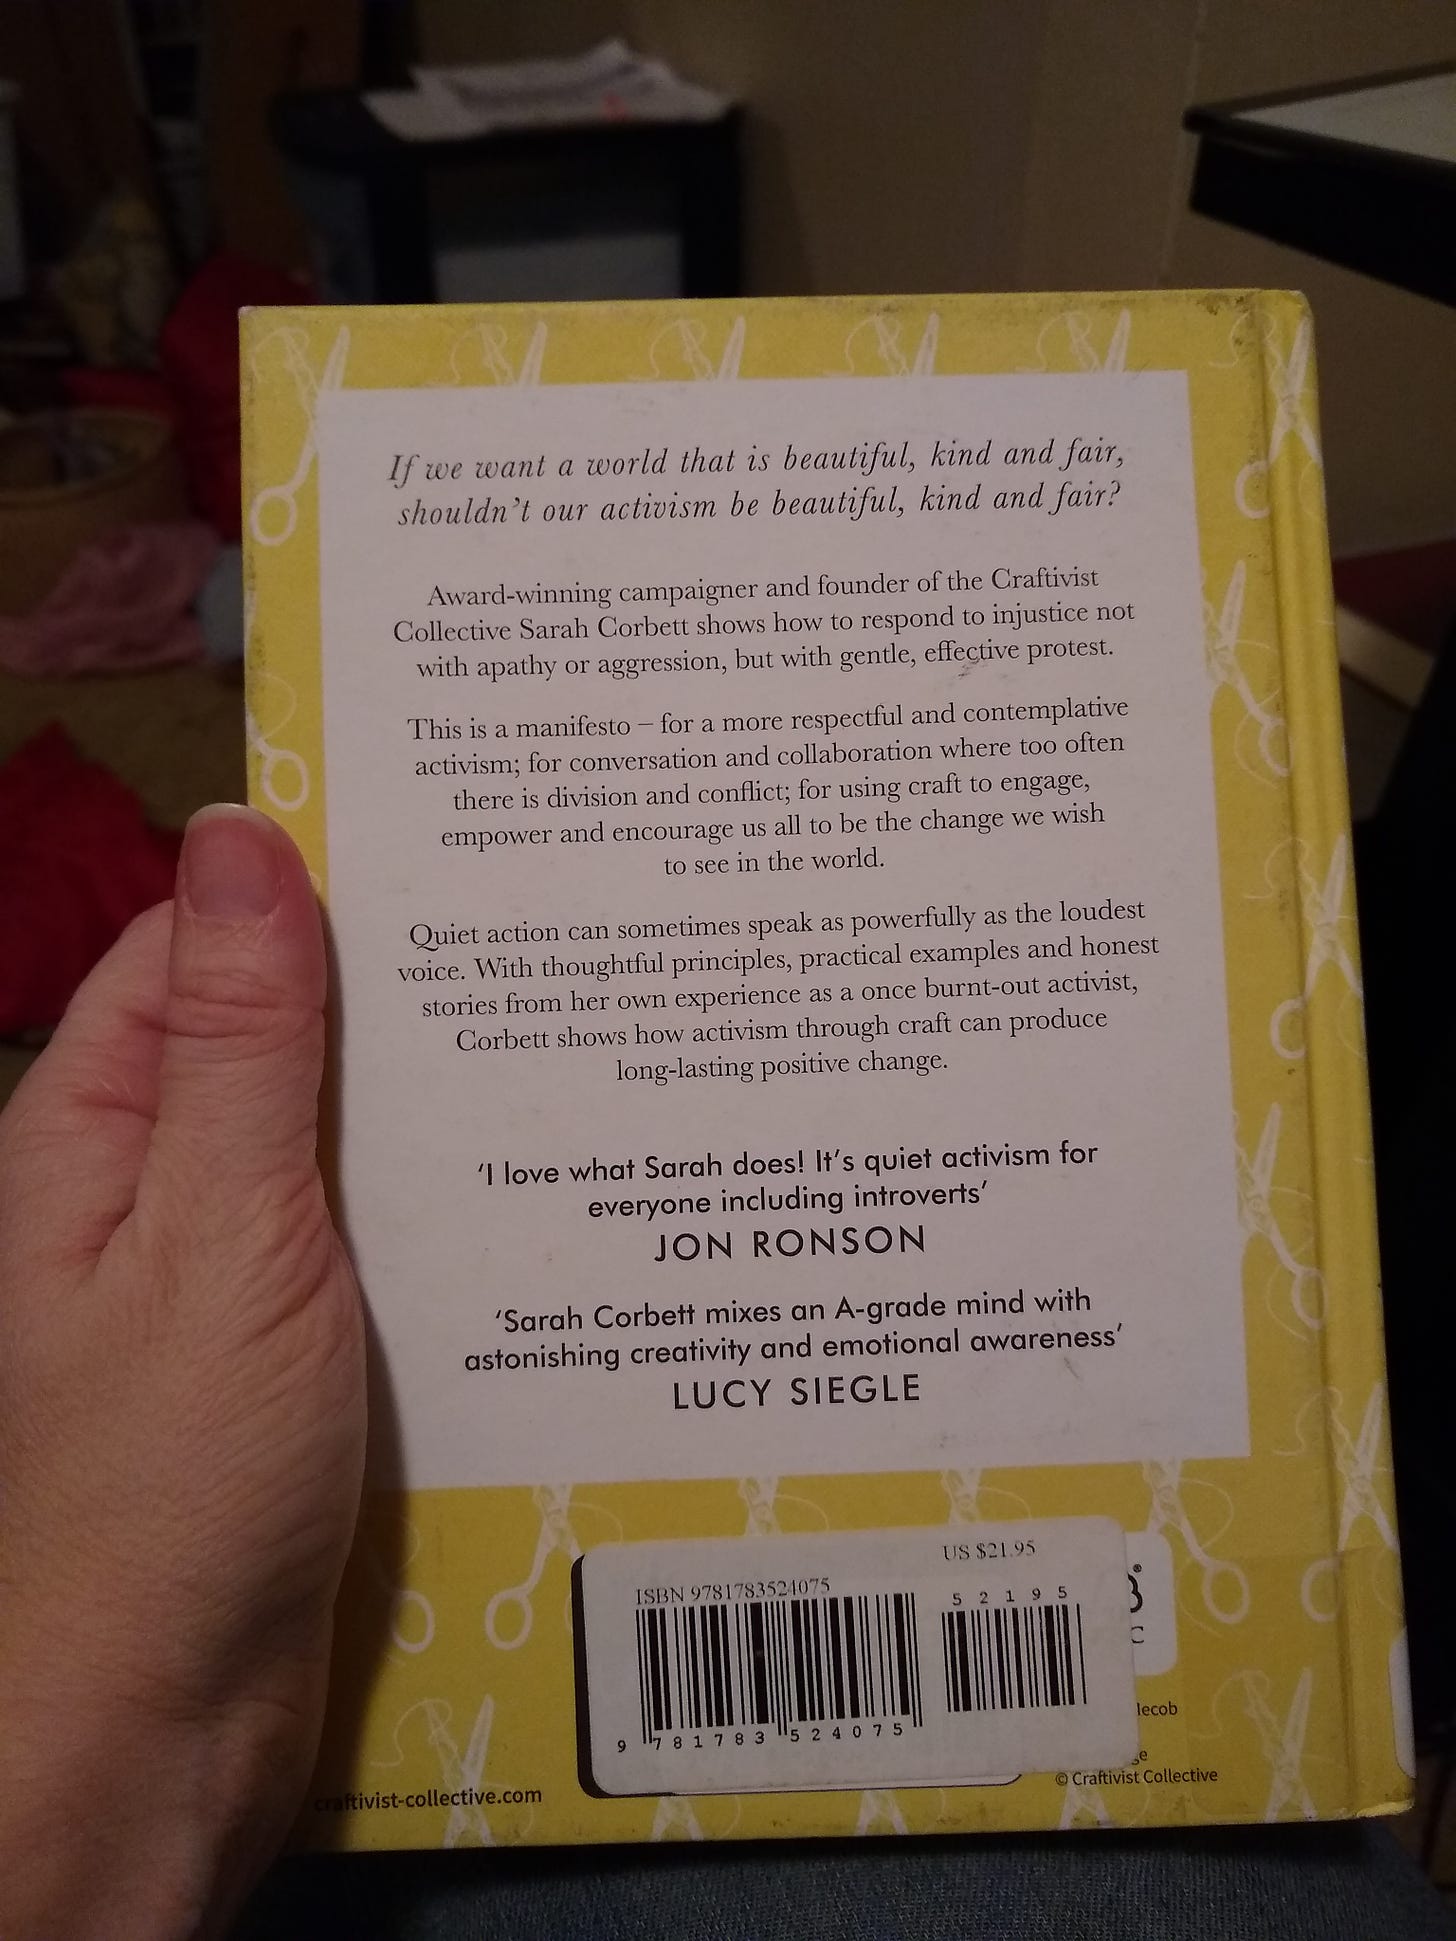 Back copy of How to be a Craftivist, including "If we want a world that is beautiful, kind and fair, shouldn't our activism be beautiful, kind and fair?"